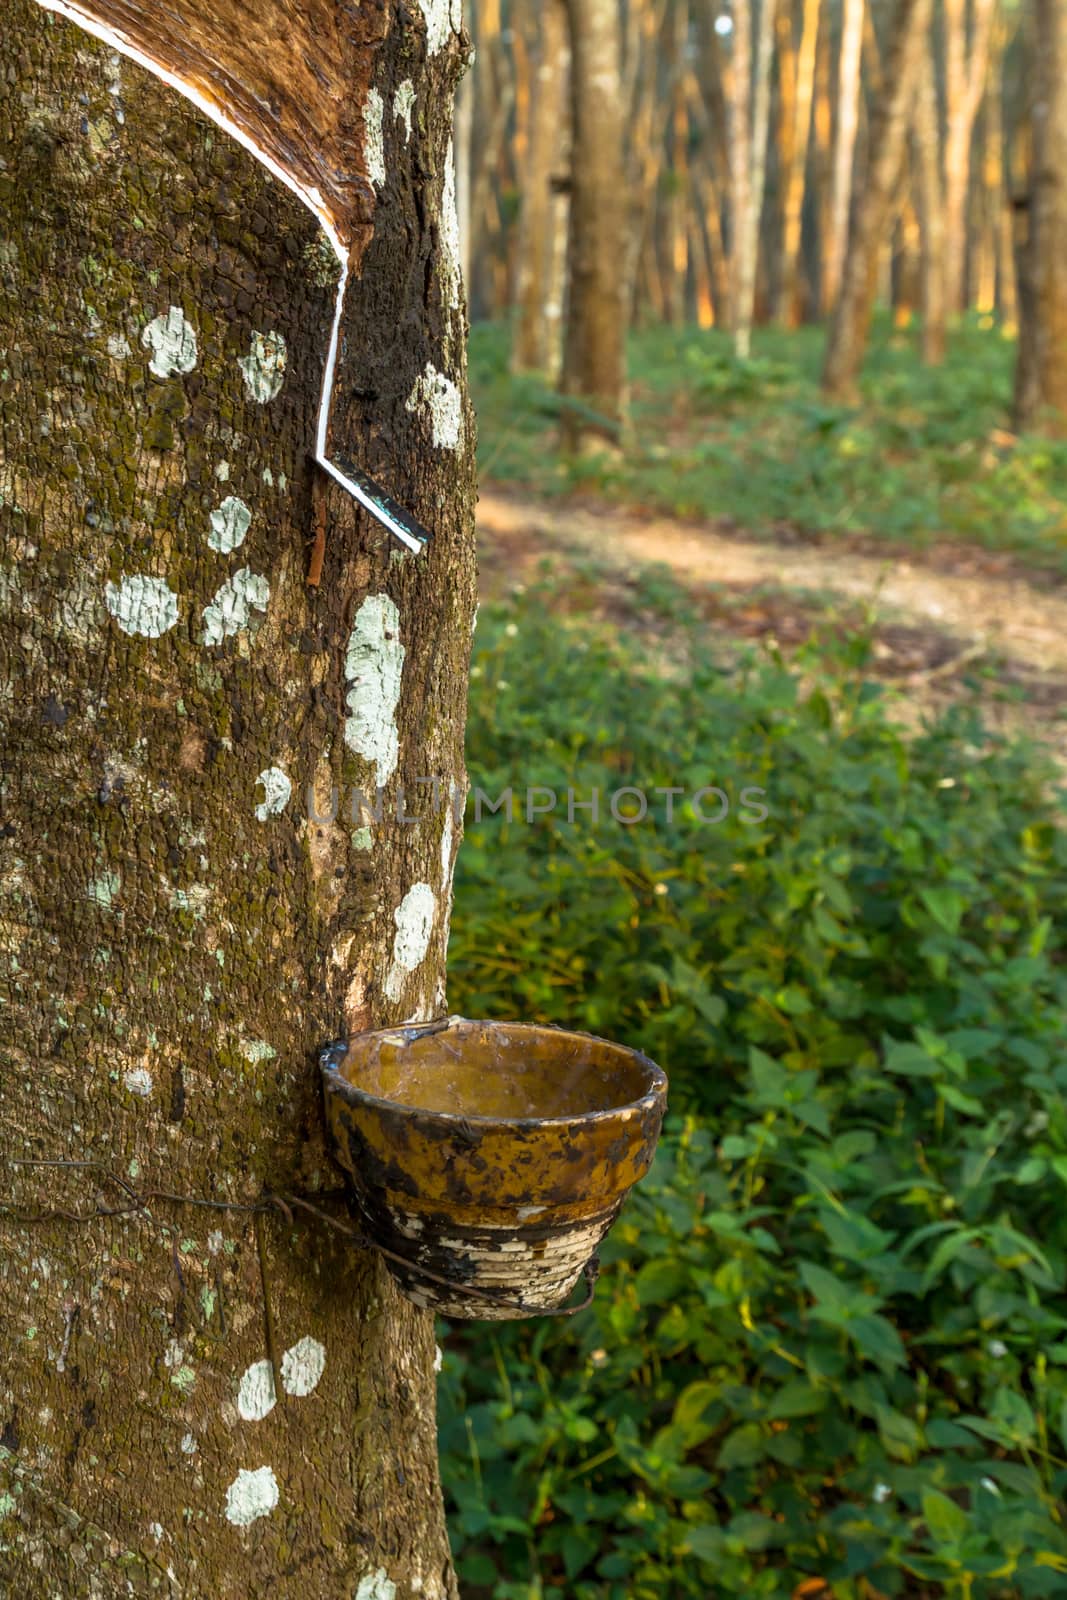 Tracks tapping rubber trees by lavoview